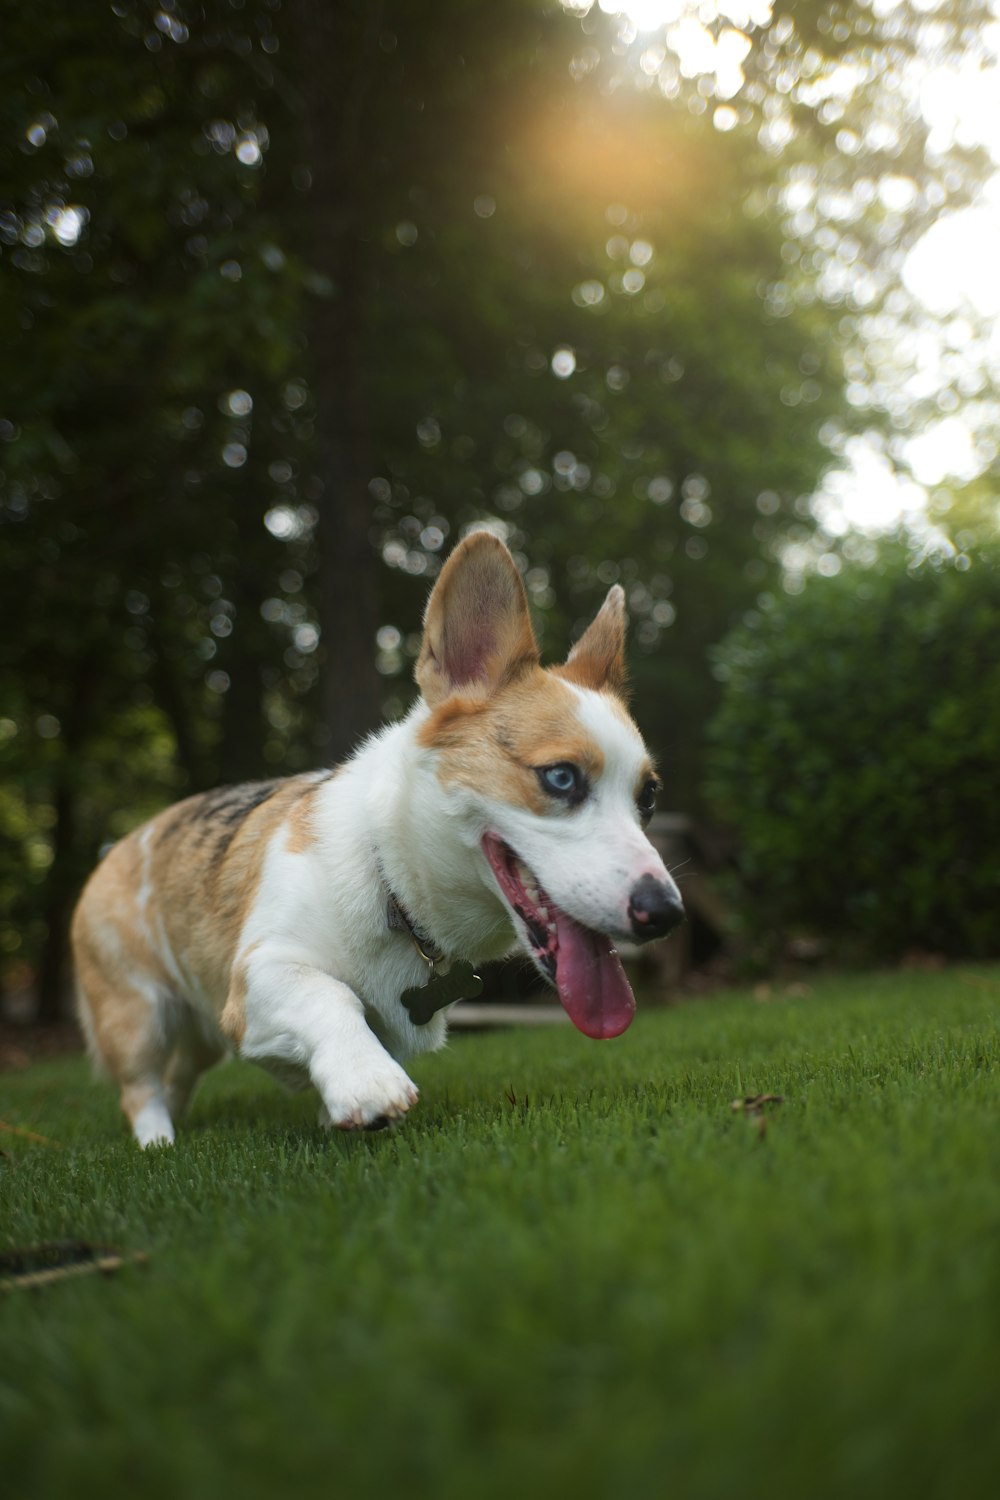 brown and white corgi running on green grass field during daytime